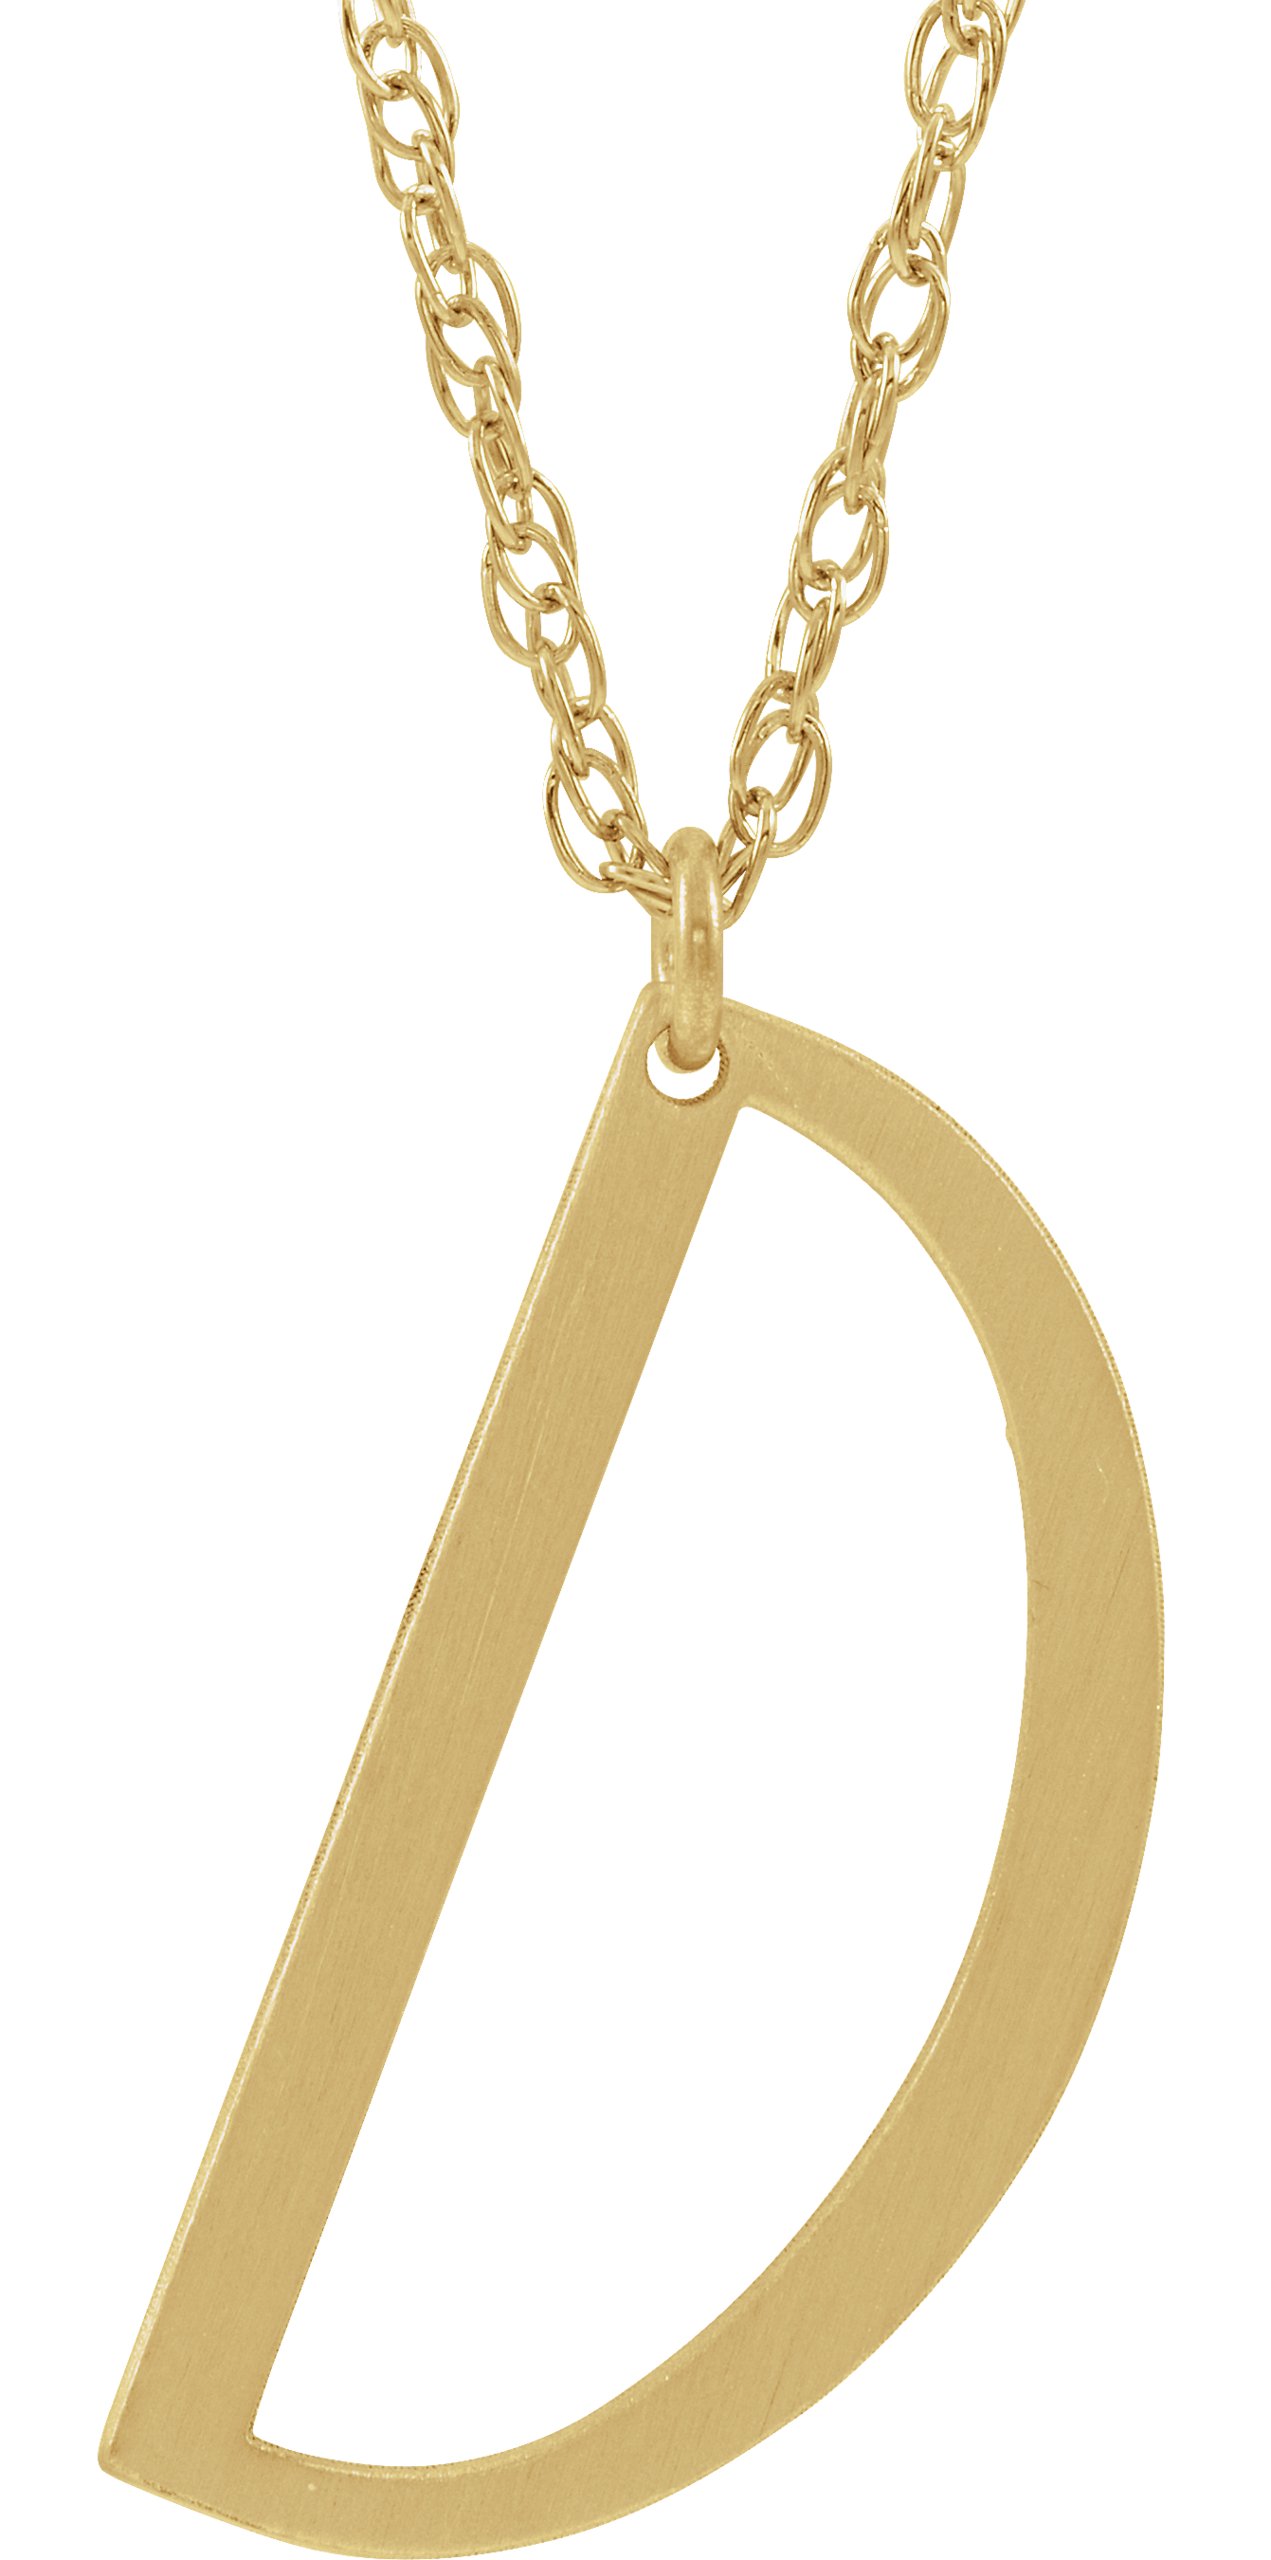 14K Yellow Gold-Plated Sterling Silver Block Initial D 16-18" Necklace with Brush Finish